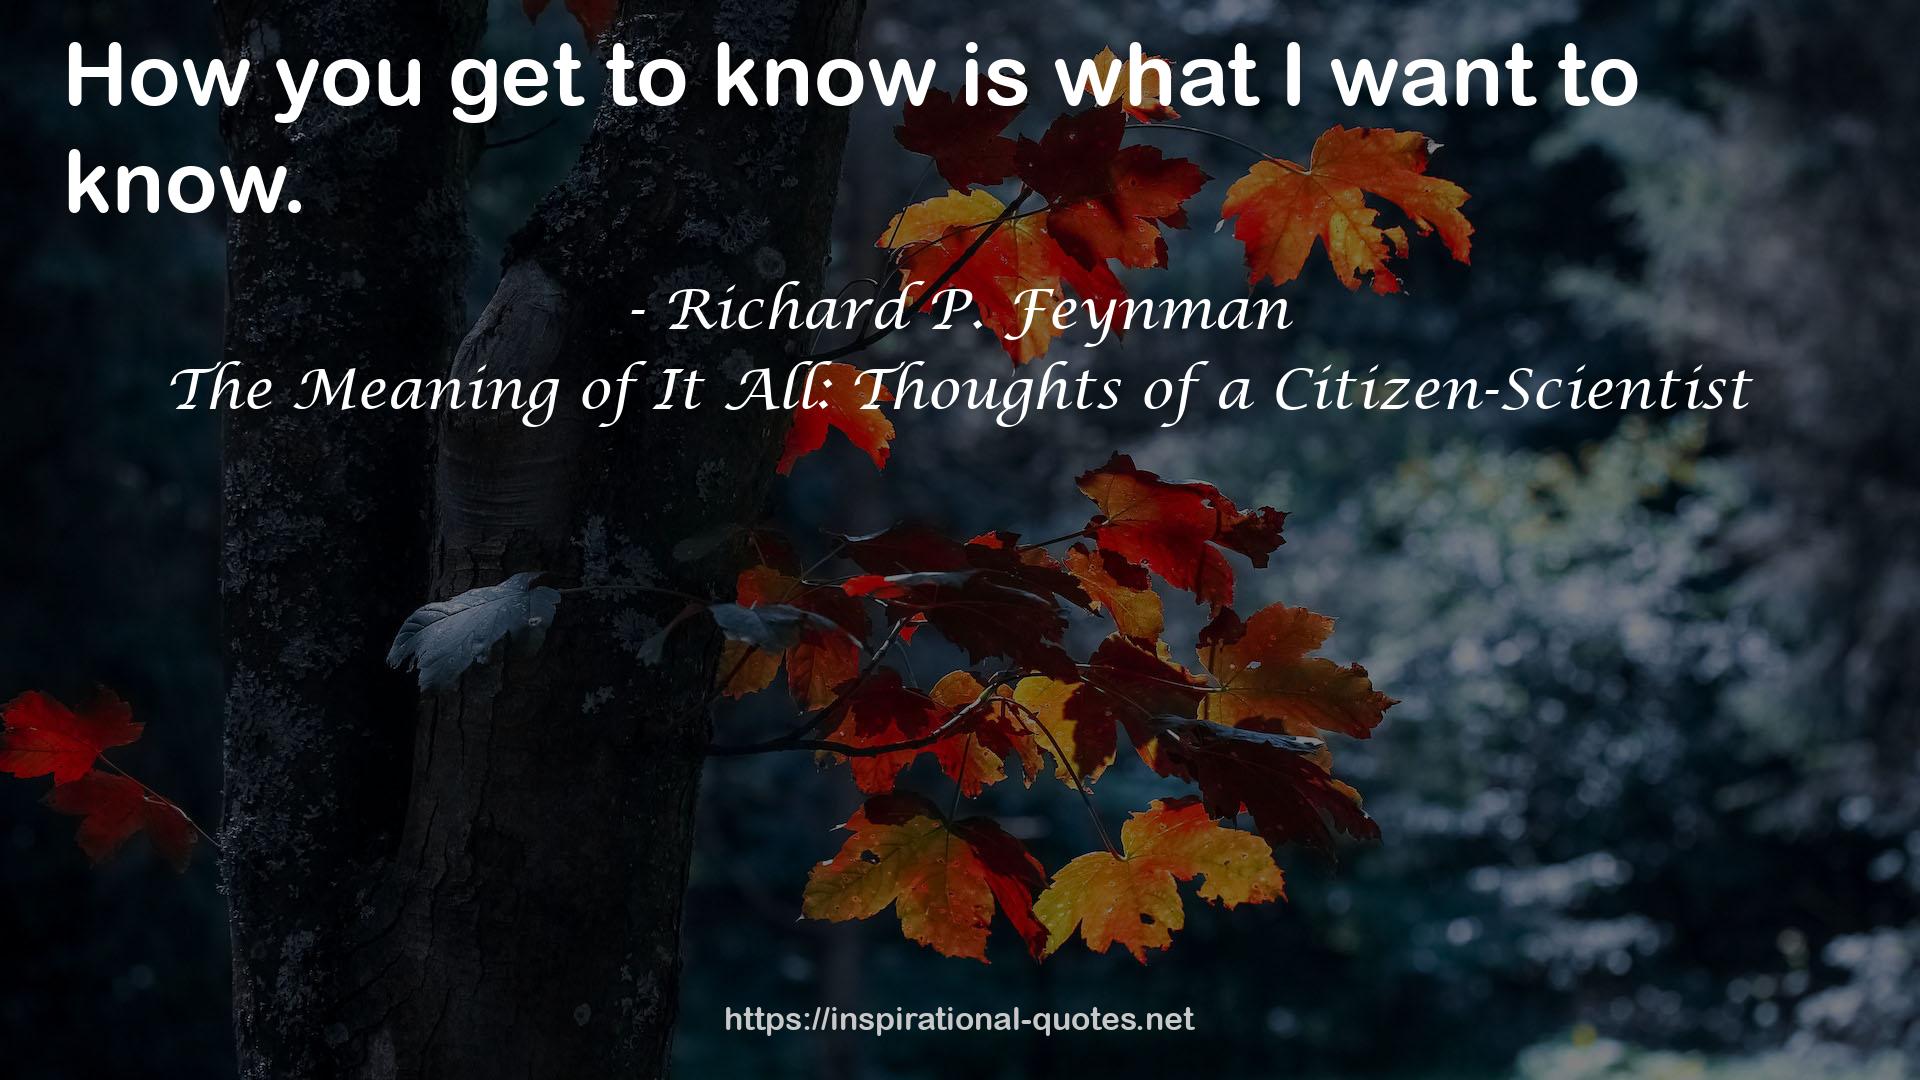 The Meaning of It All: Thoughts of a Citizen-Scientist QUOTES